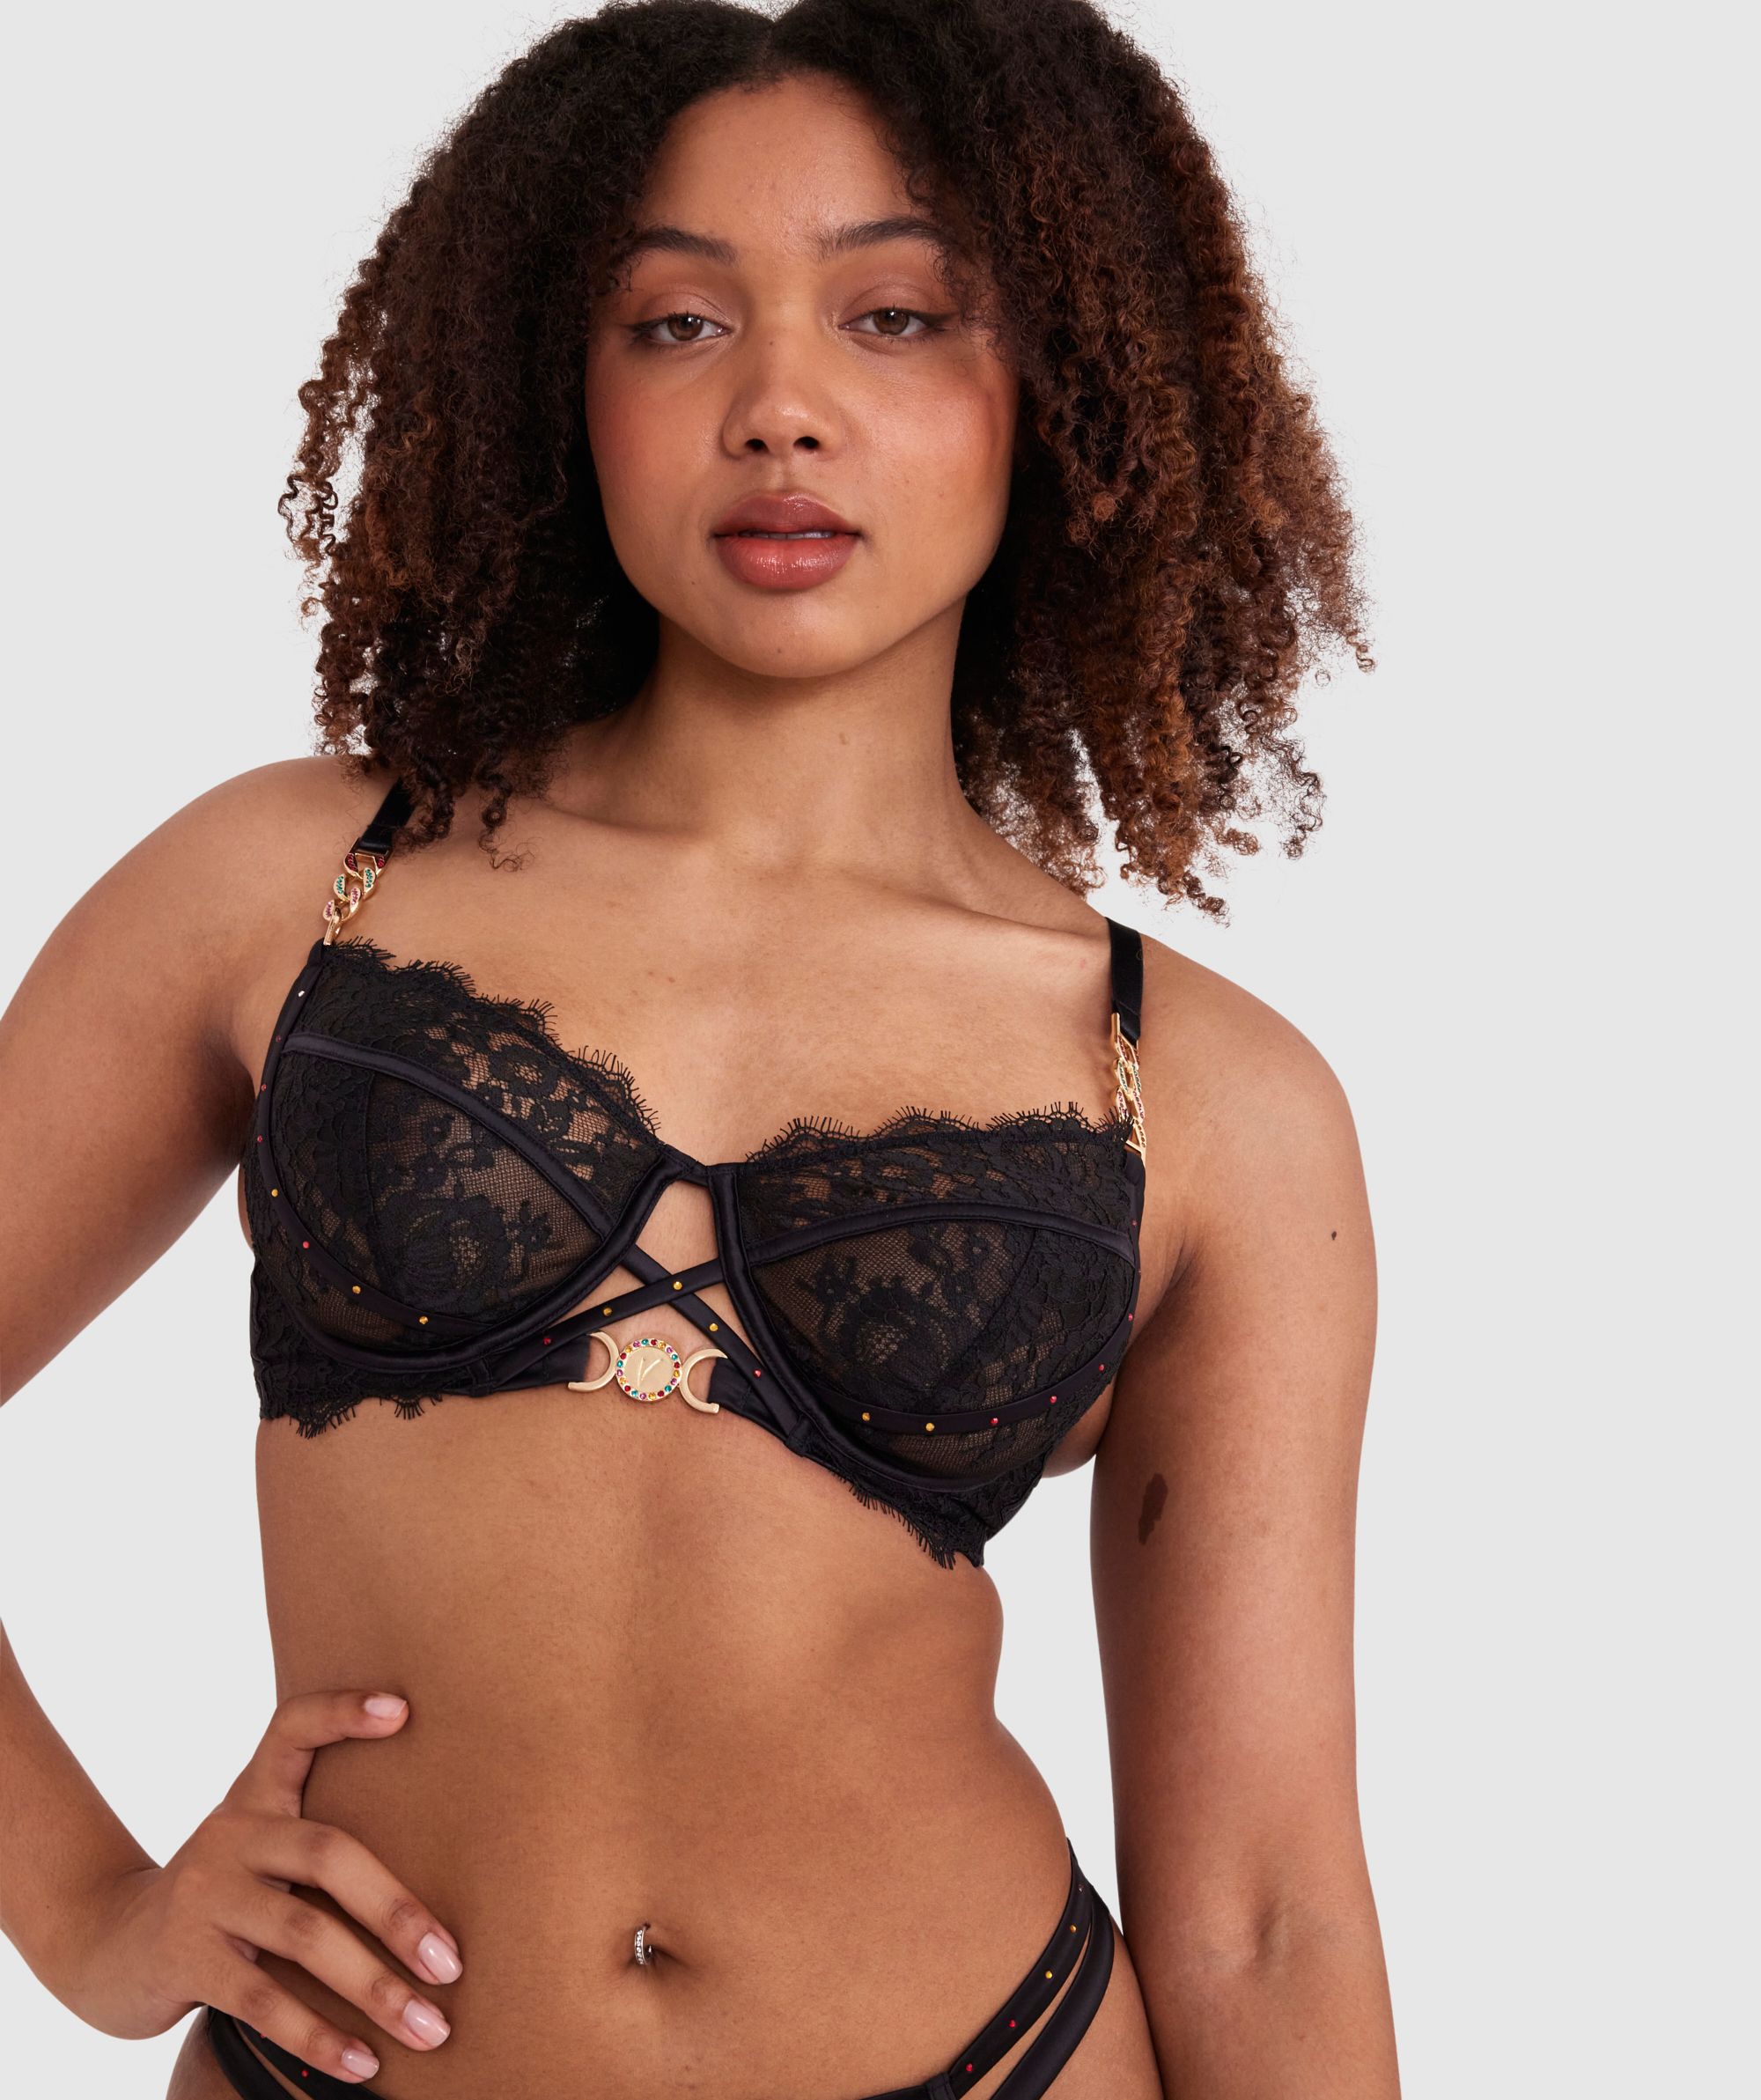 Bras N Things: Full cup FABULOUS + Your favourite lingerie sets and knicker  offers!